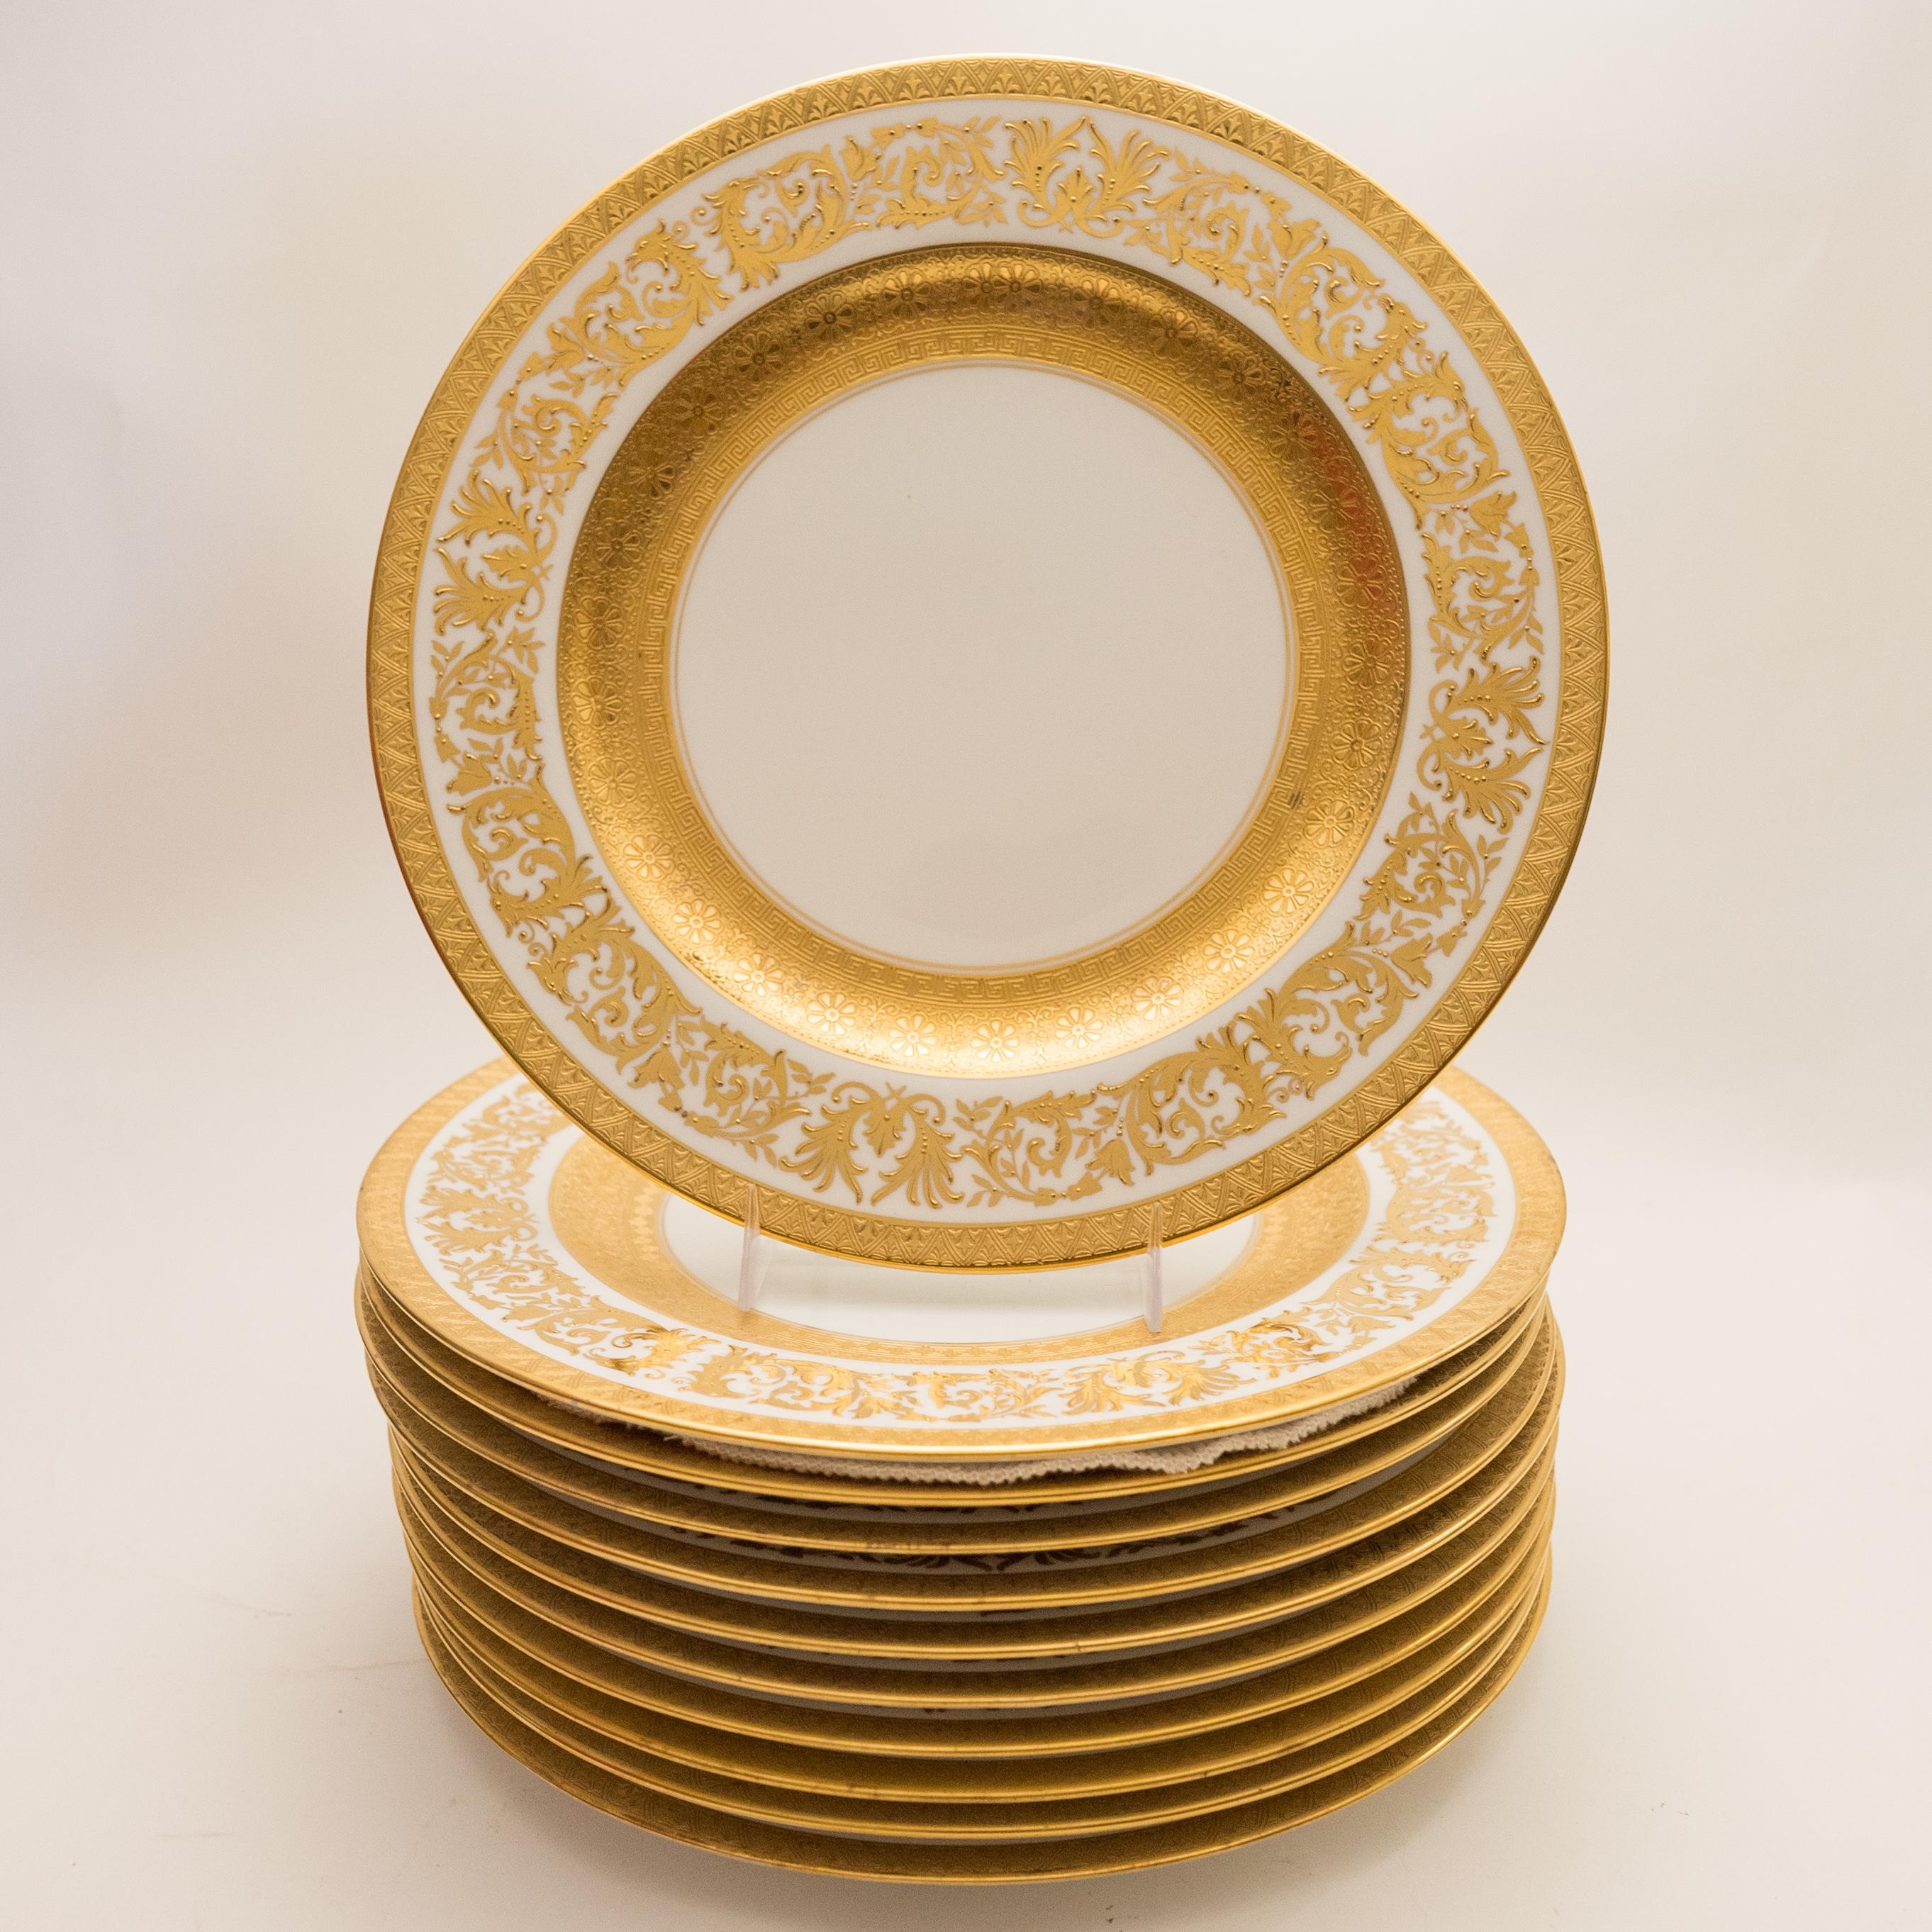 Hand-Crafted 11 Gilt Encrusted Dinner Plates, Antique Custom Order with Wide Gold Banding